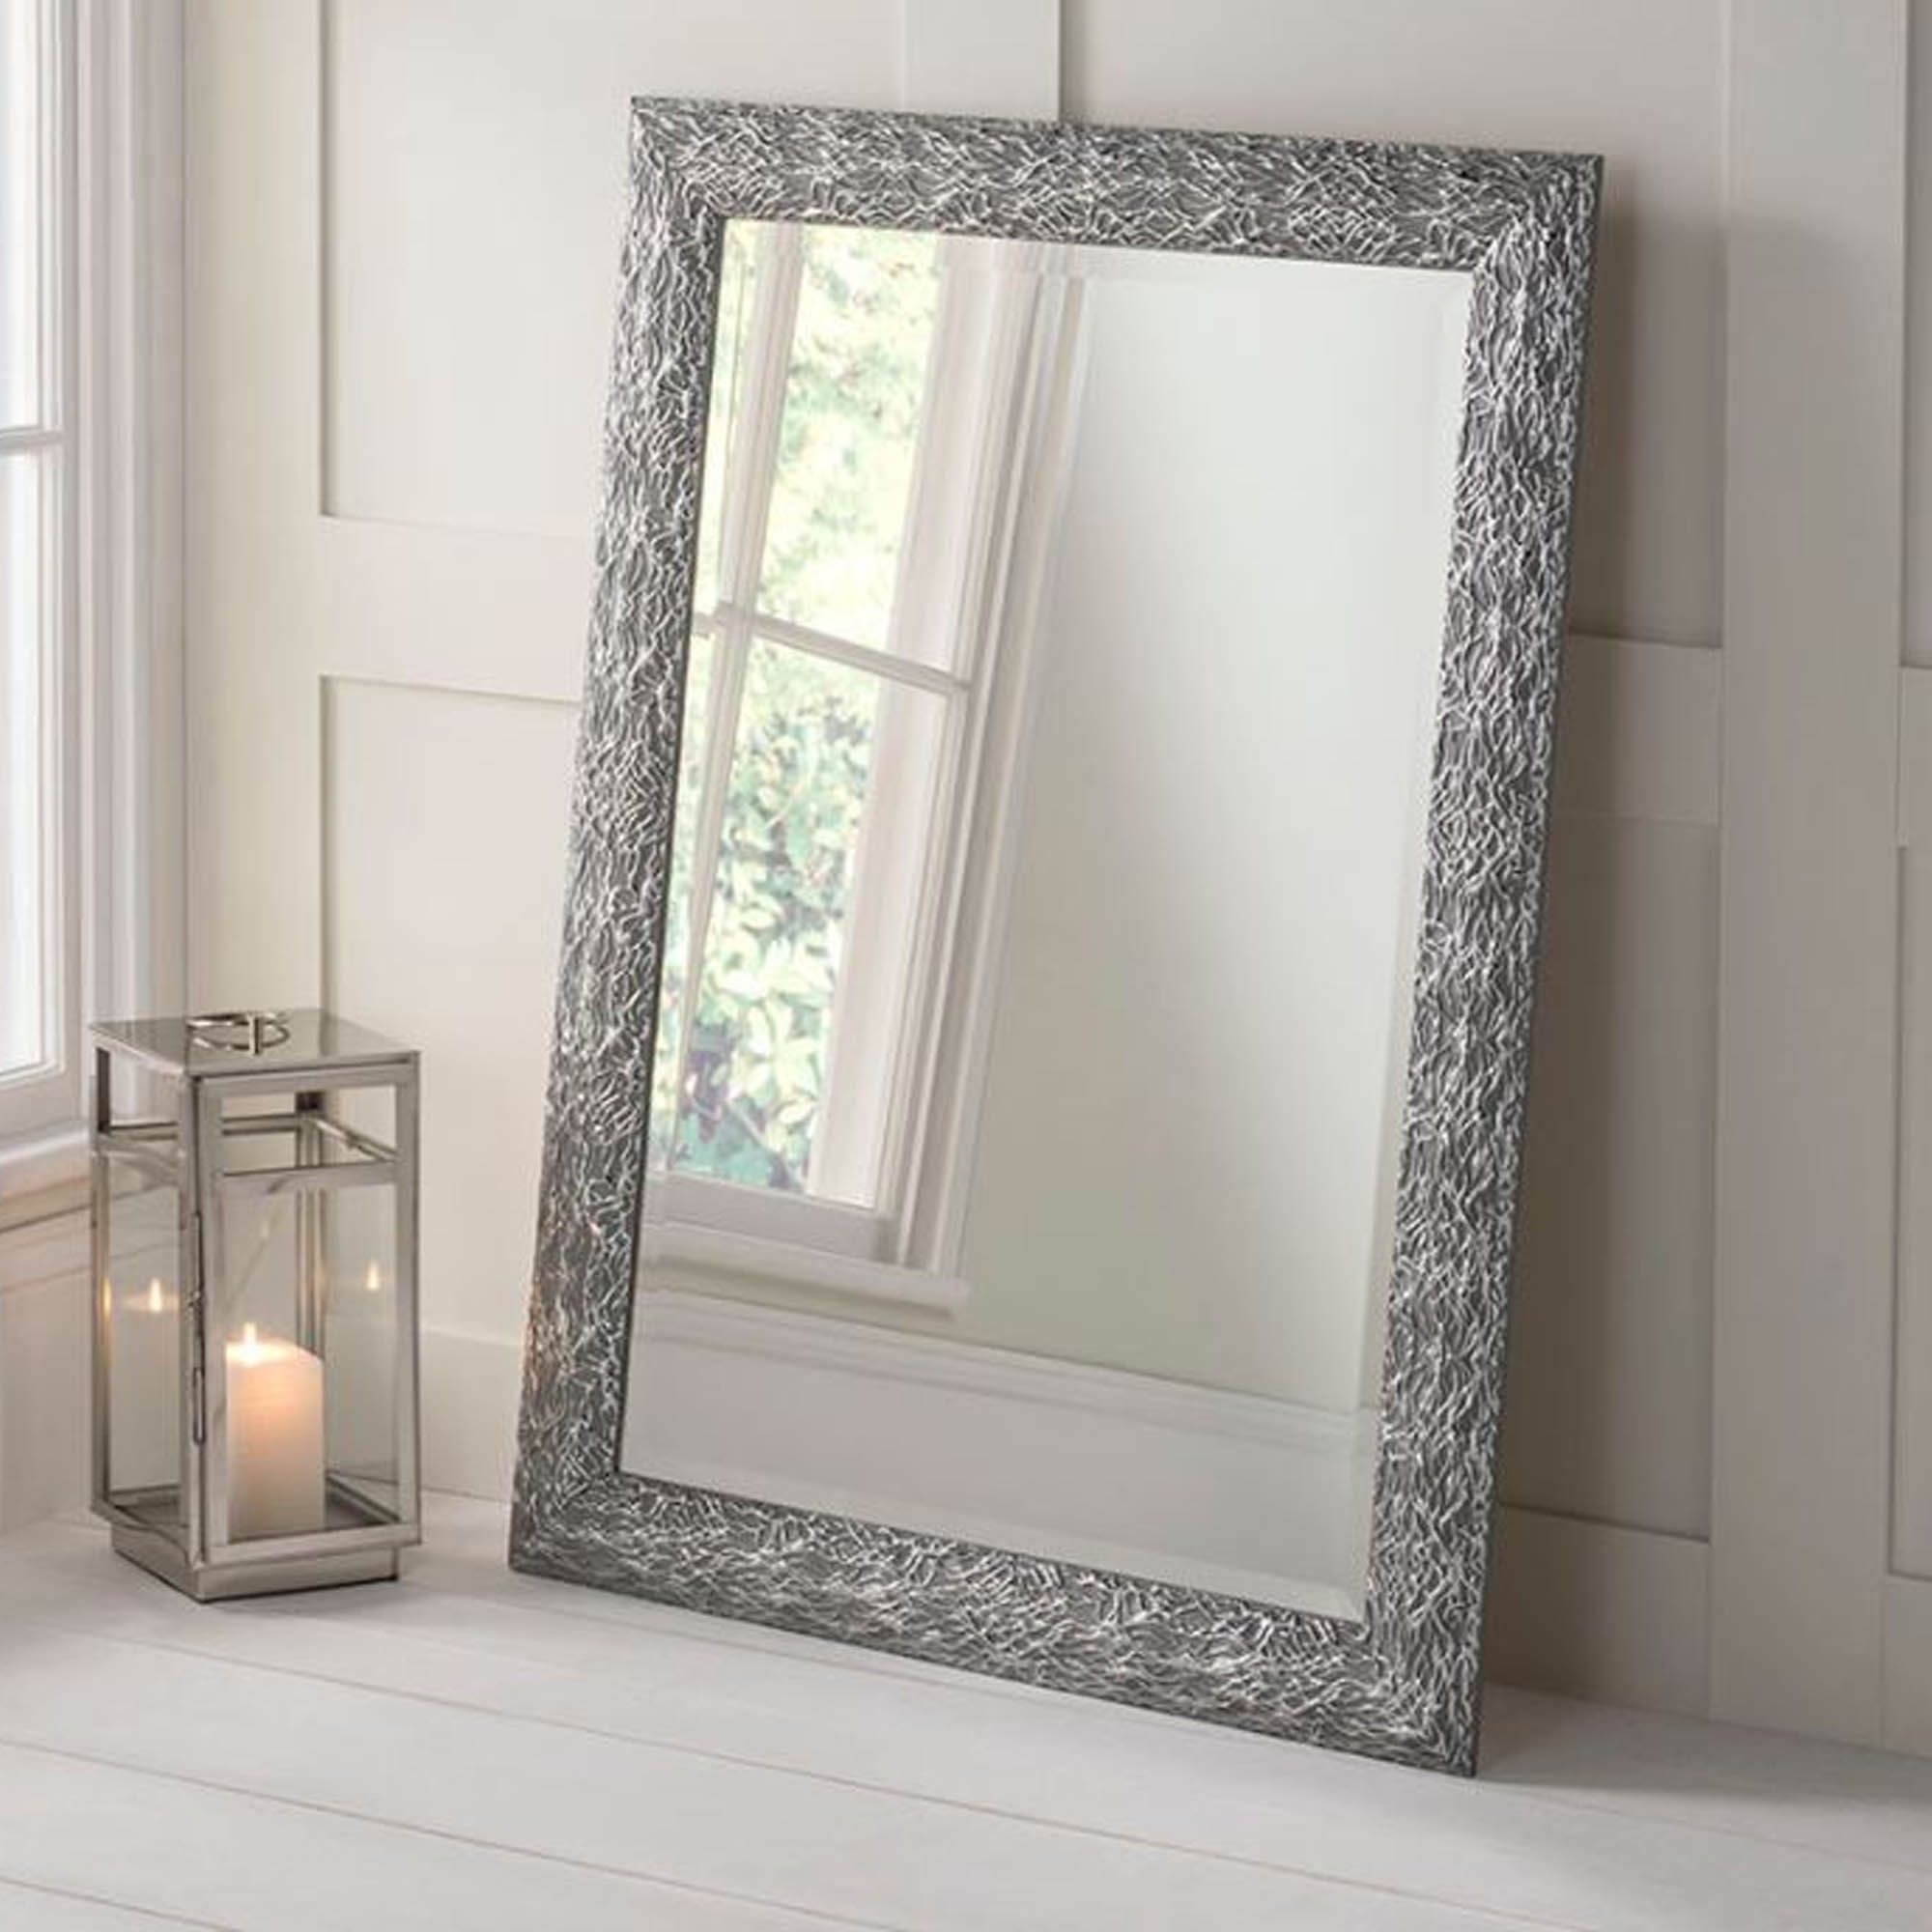 Detailed Rectangular Grey And Silver Wall Mirror | Hd365 Pertaining To Silver Asymmetrical Wall Mirrors (View 4 of 15)